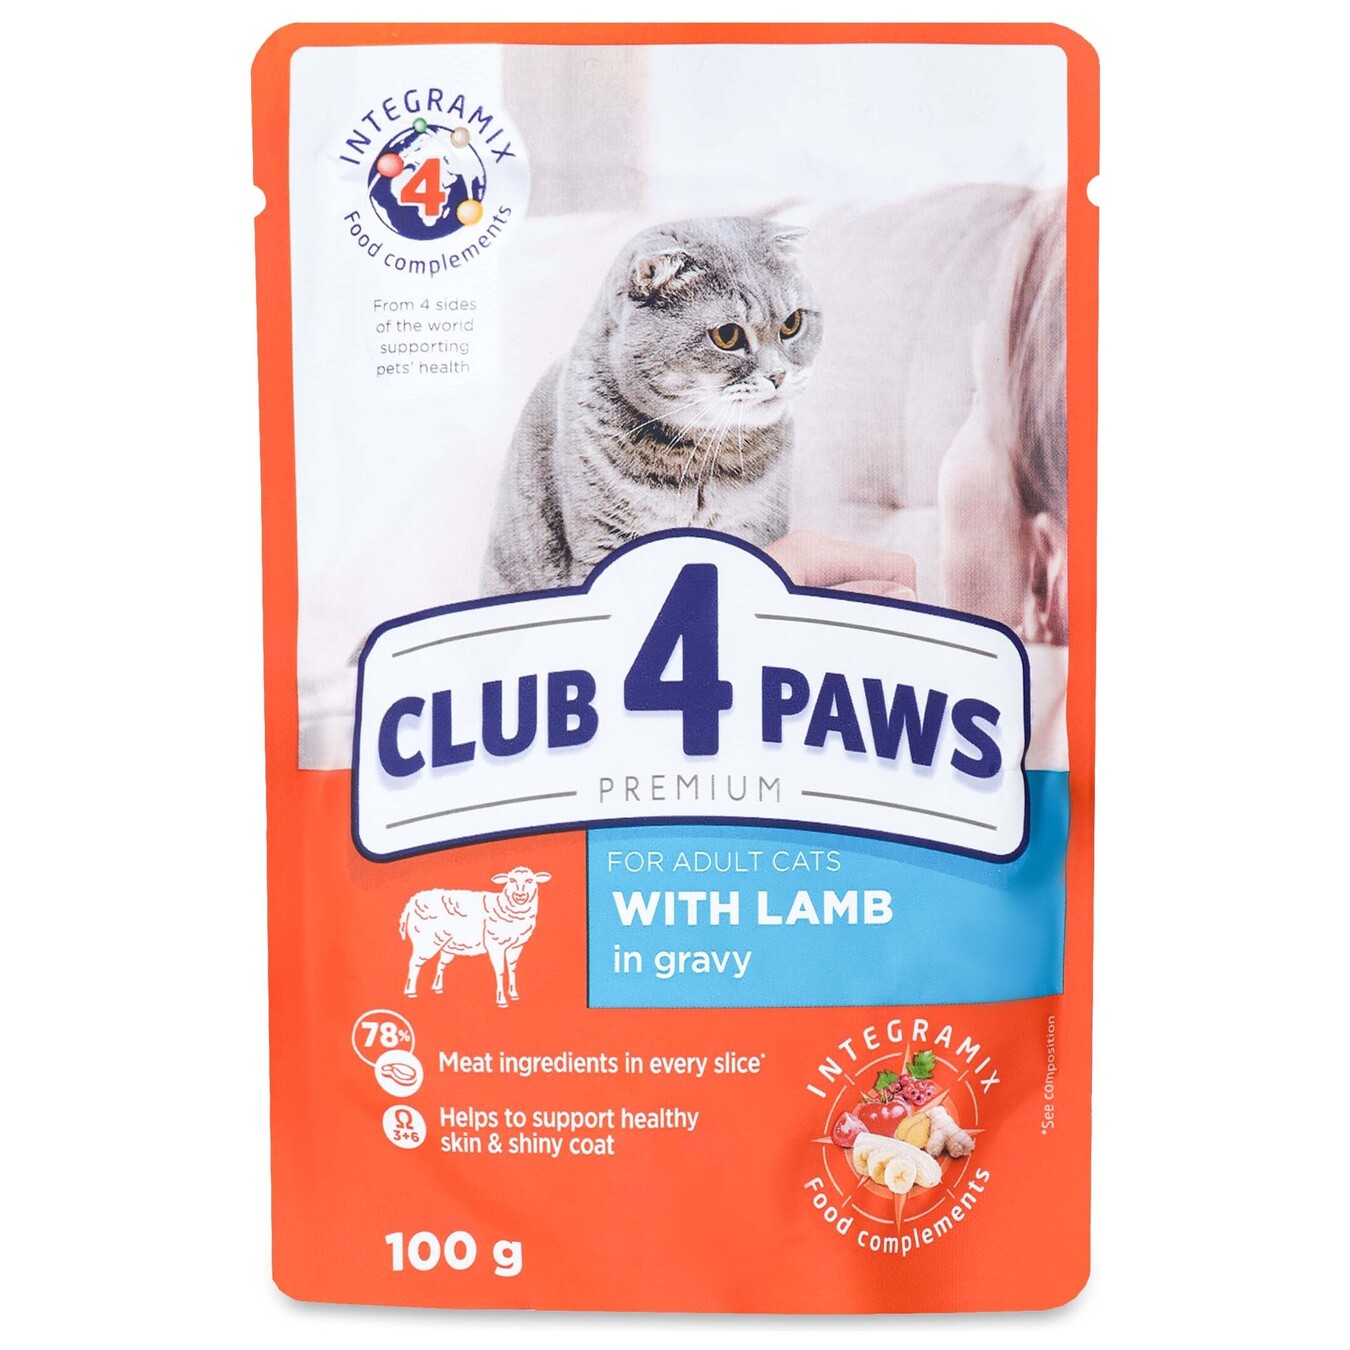 Club 4 paws full-ration canned food for adult cats Premium With lamb in sauce 100g